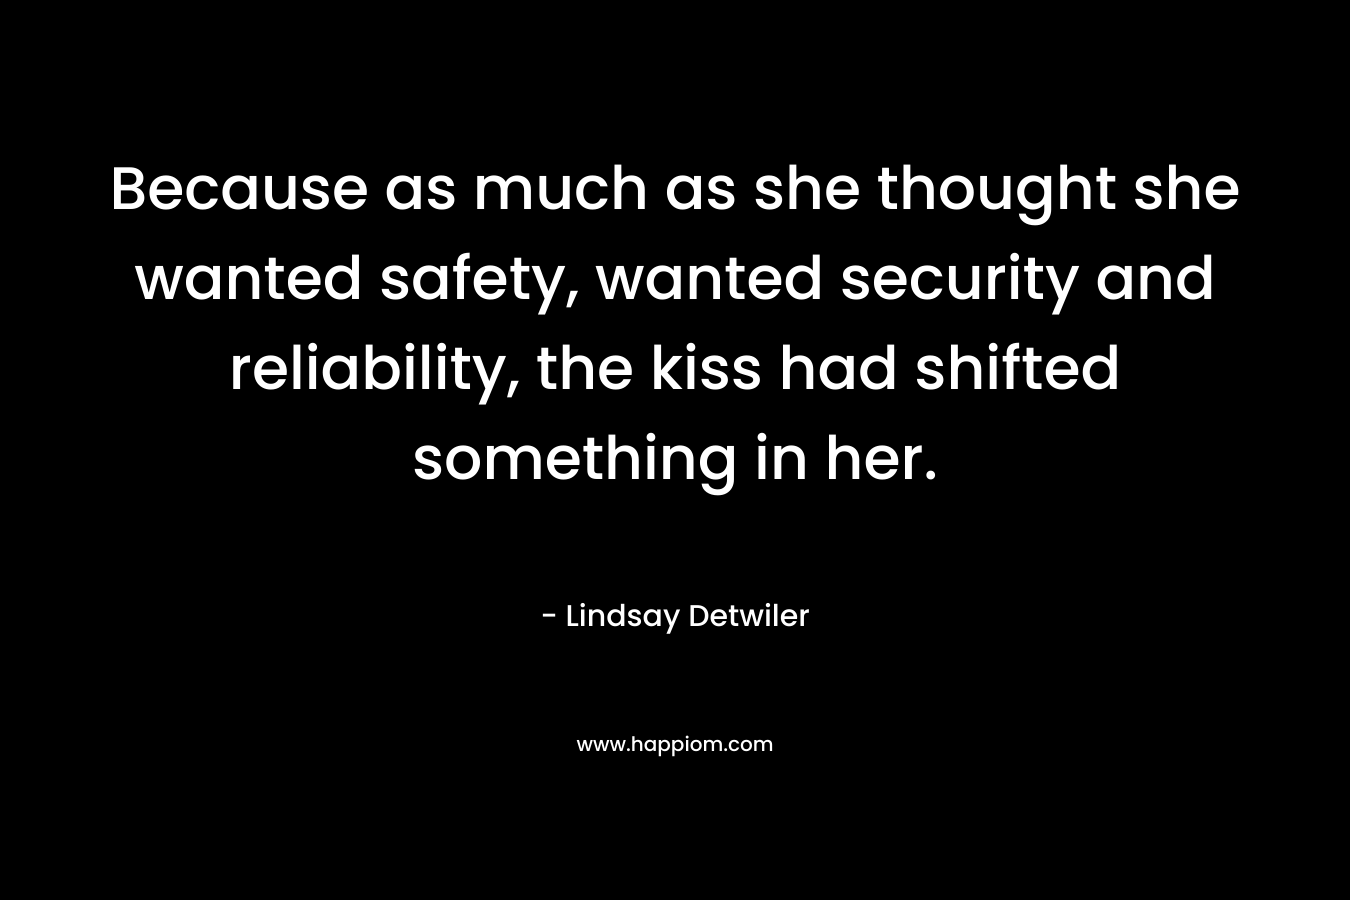 Because as much as she thought she wanted safety, wanted security and reliability, the kiss had shifted something in her.